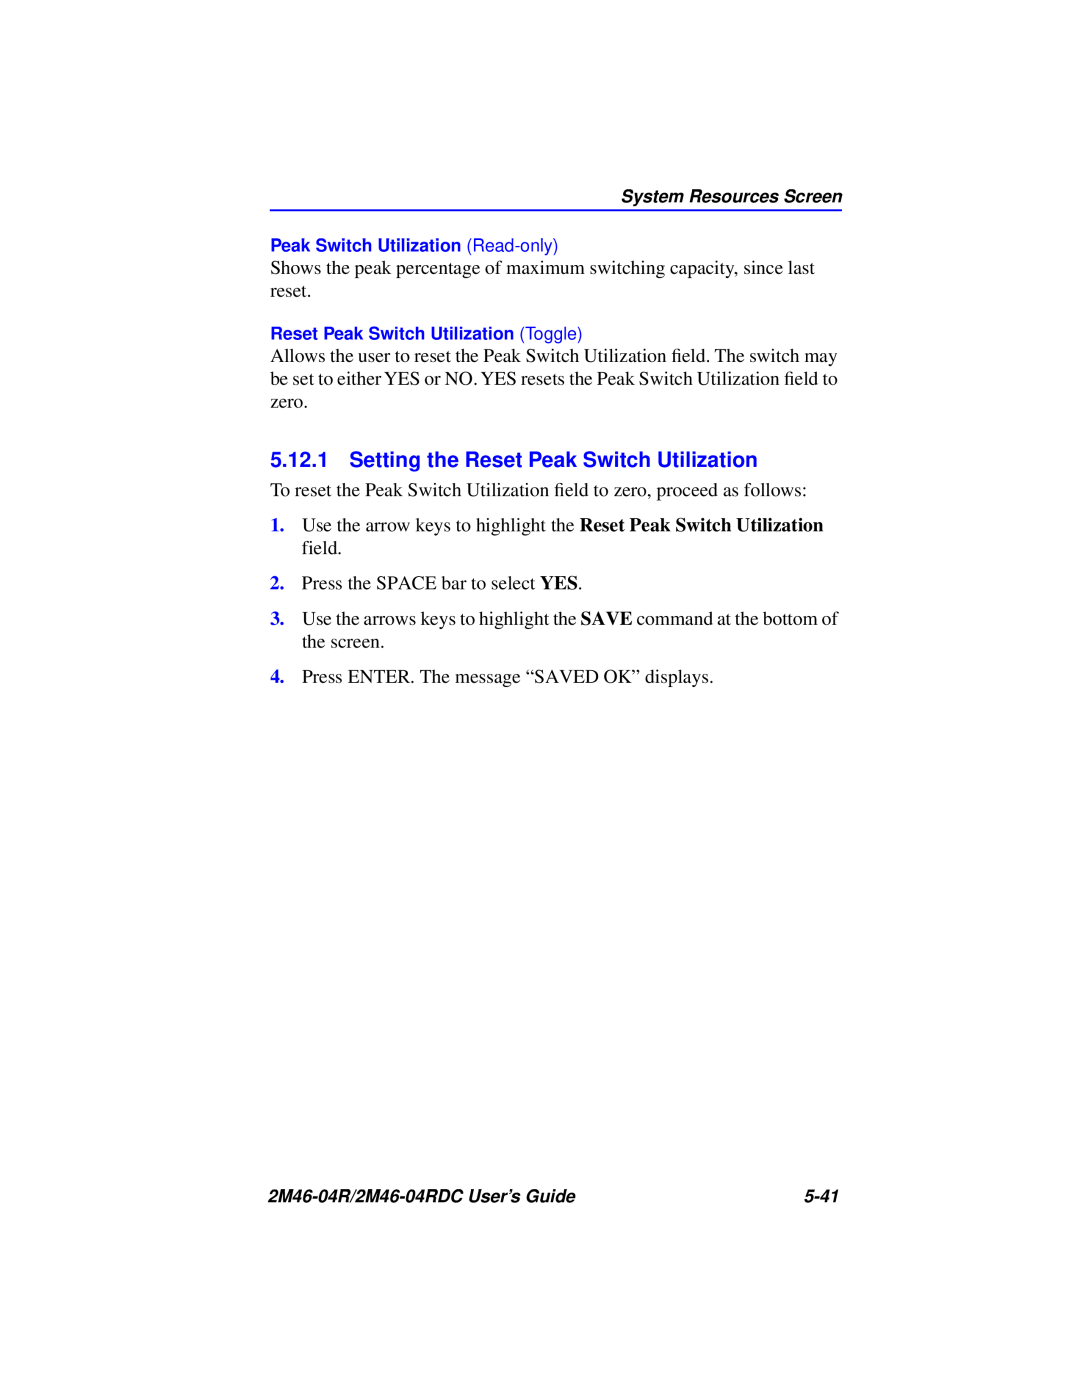 Cabletron Systems pmn manual Setting the Reset Peak Switch Utilization 